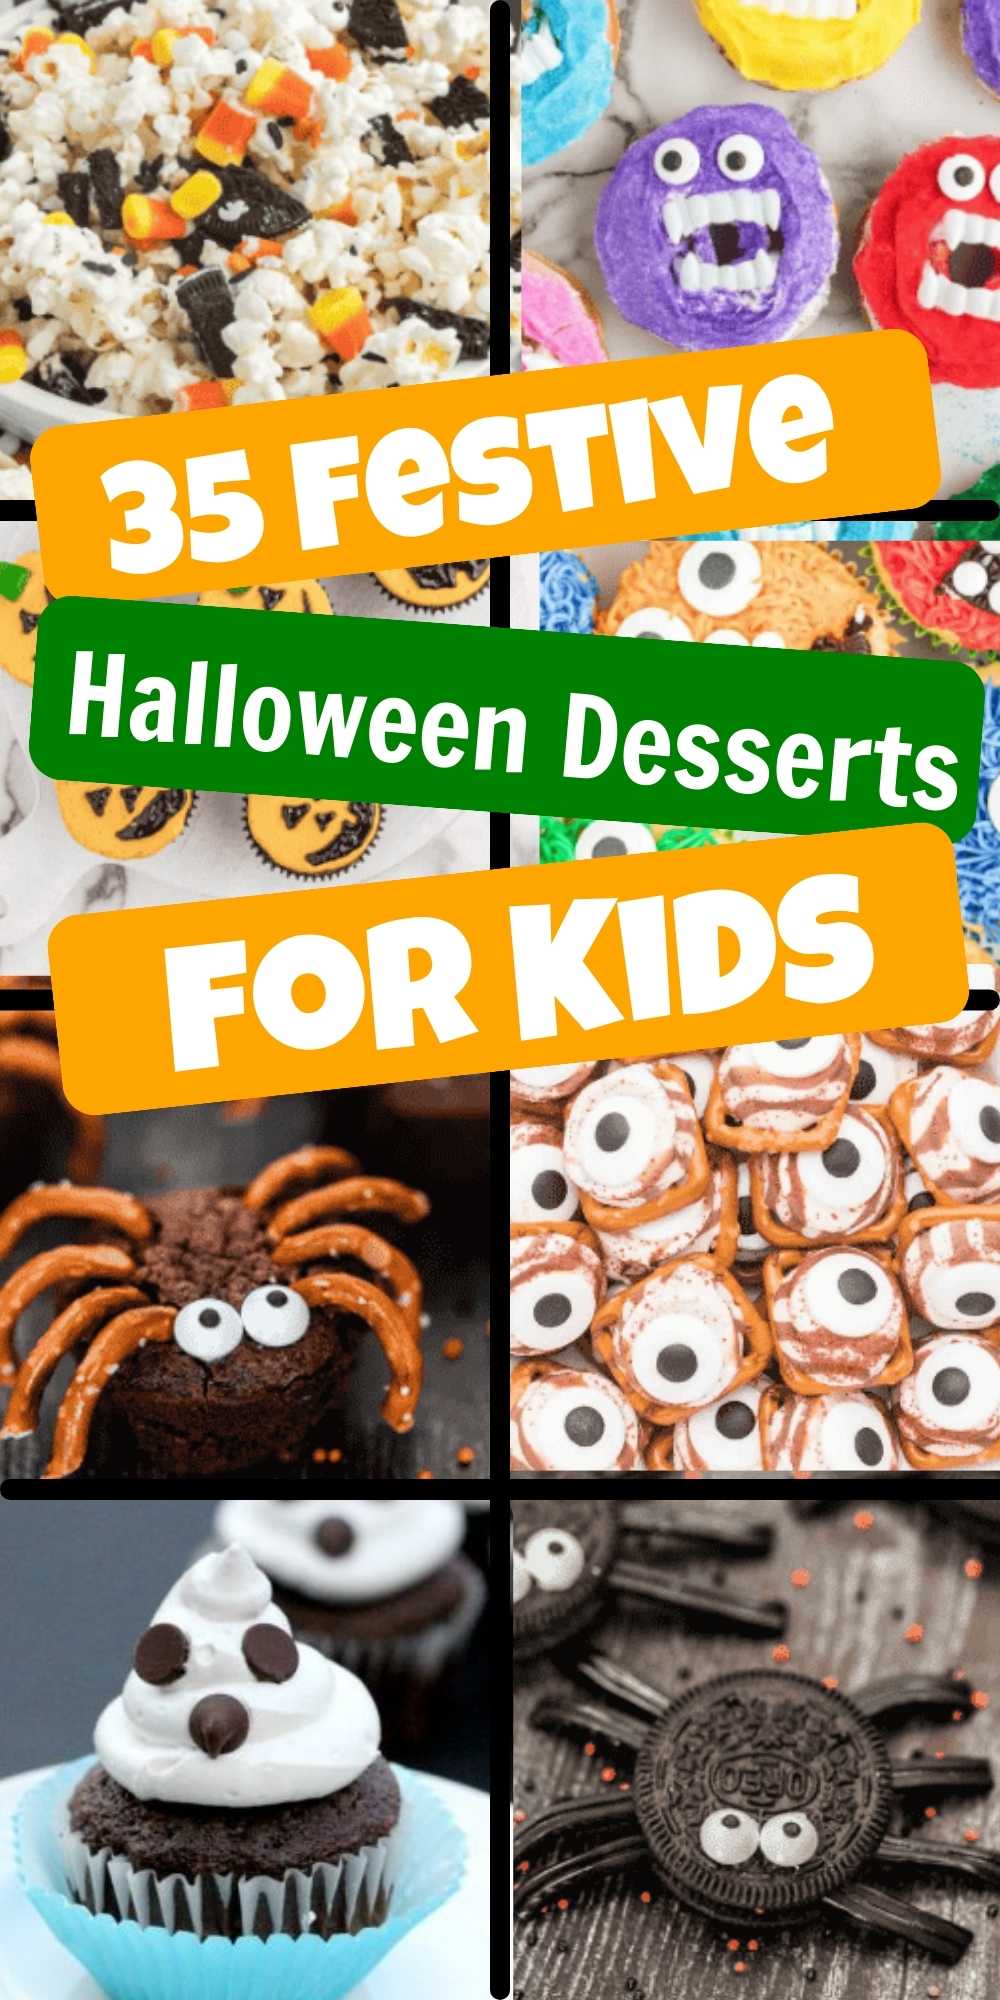 Learn how to make the cutest Halloween Desserts for Kids.  35 easy Halloween treats everyone will enjoy. These delicious recipes are perfect for Halloween parties, class parties, movie night and more. #eatingonadime #halloweendessertsforkids #nobakedesserts #easyhalloweendesserts 